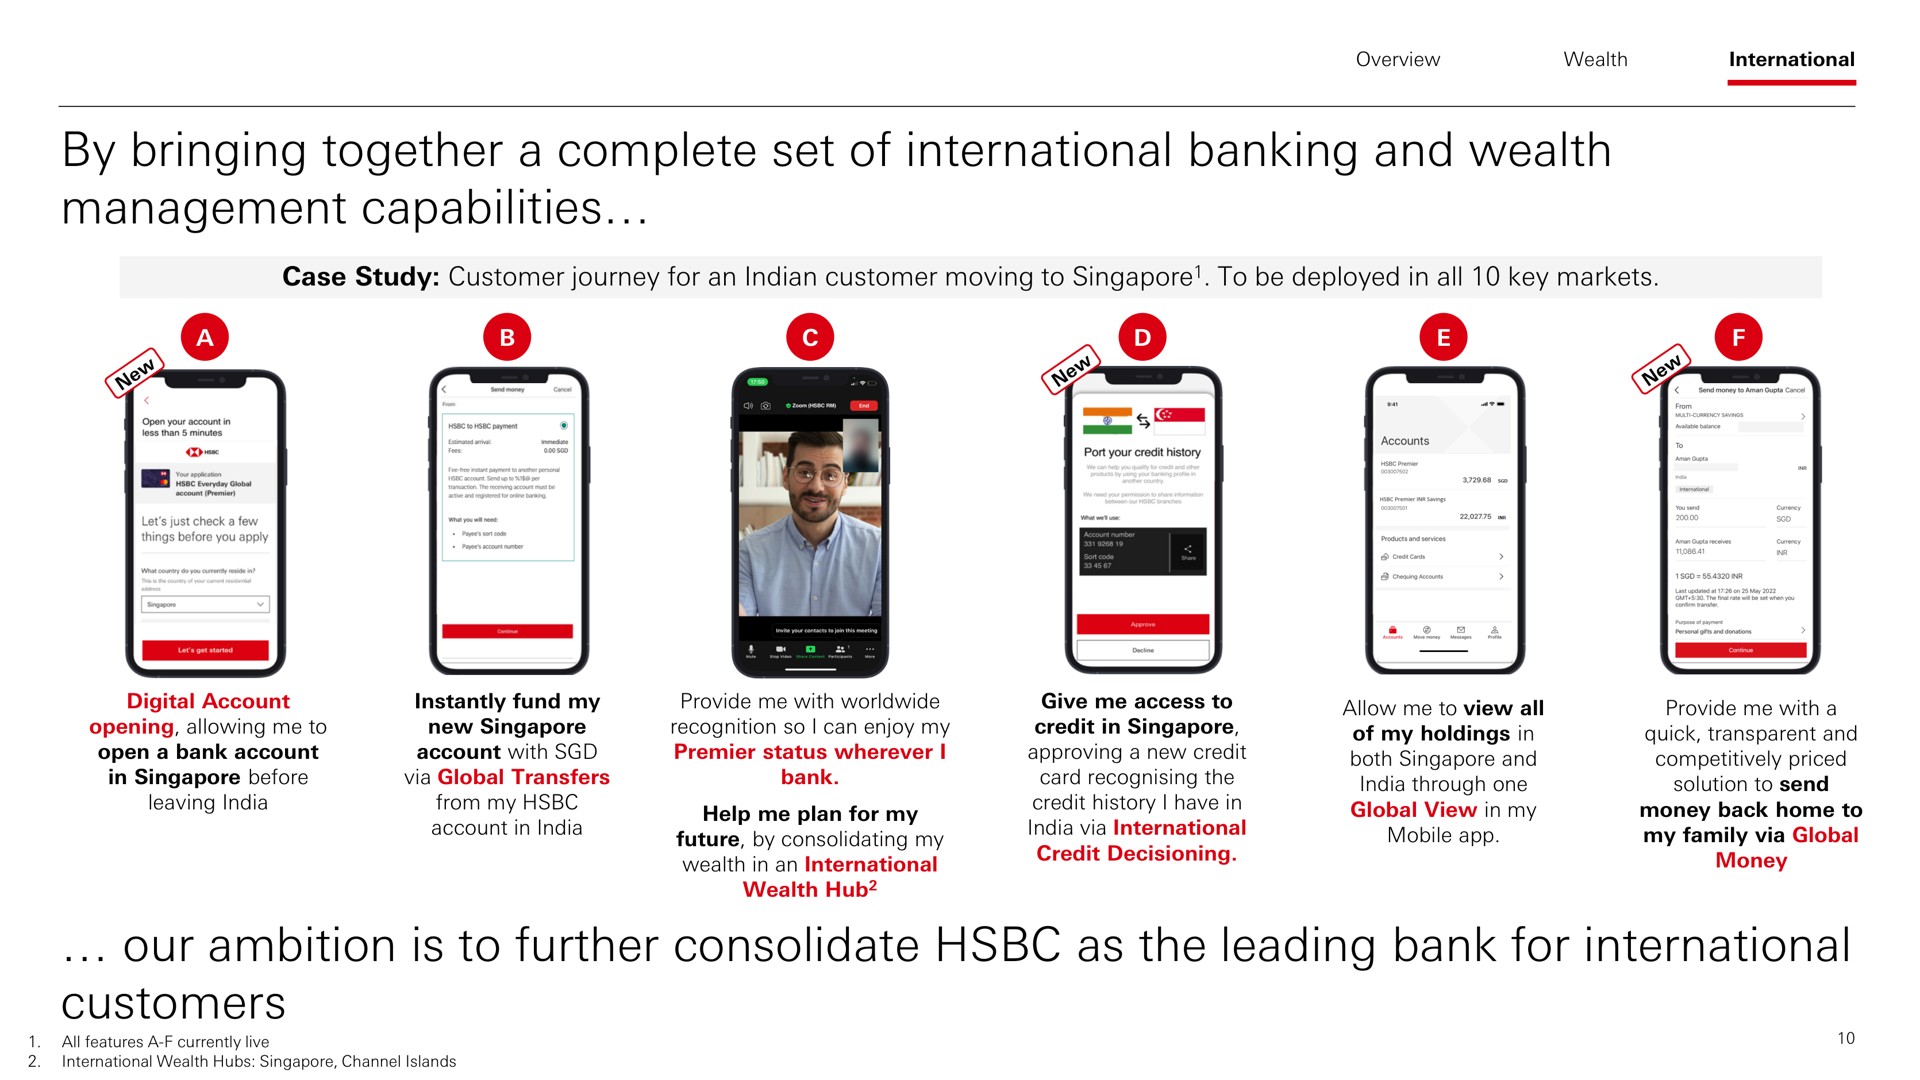 by bringing together a complete set of international banking and wealth management capabilities our ambition is to further consolidate as the leading bank for international customers | HSBC